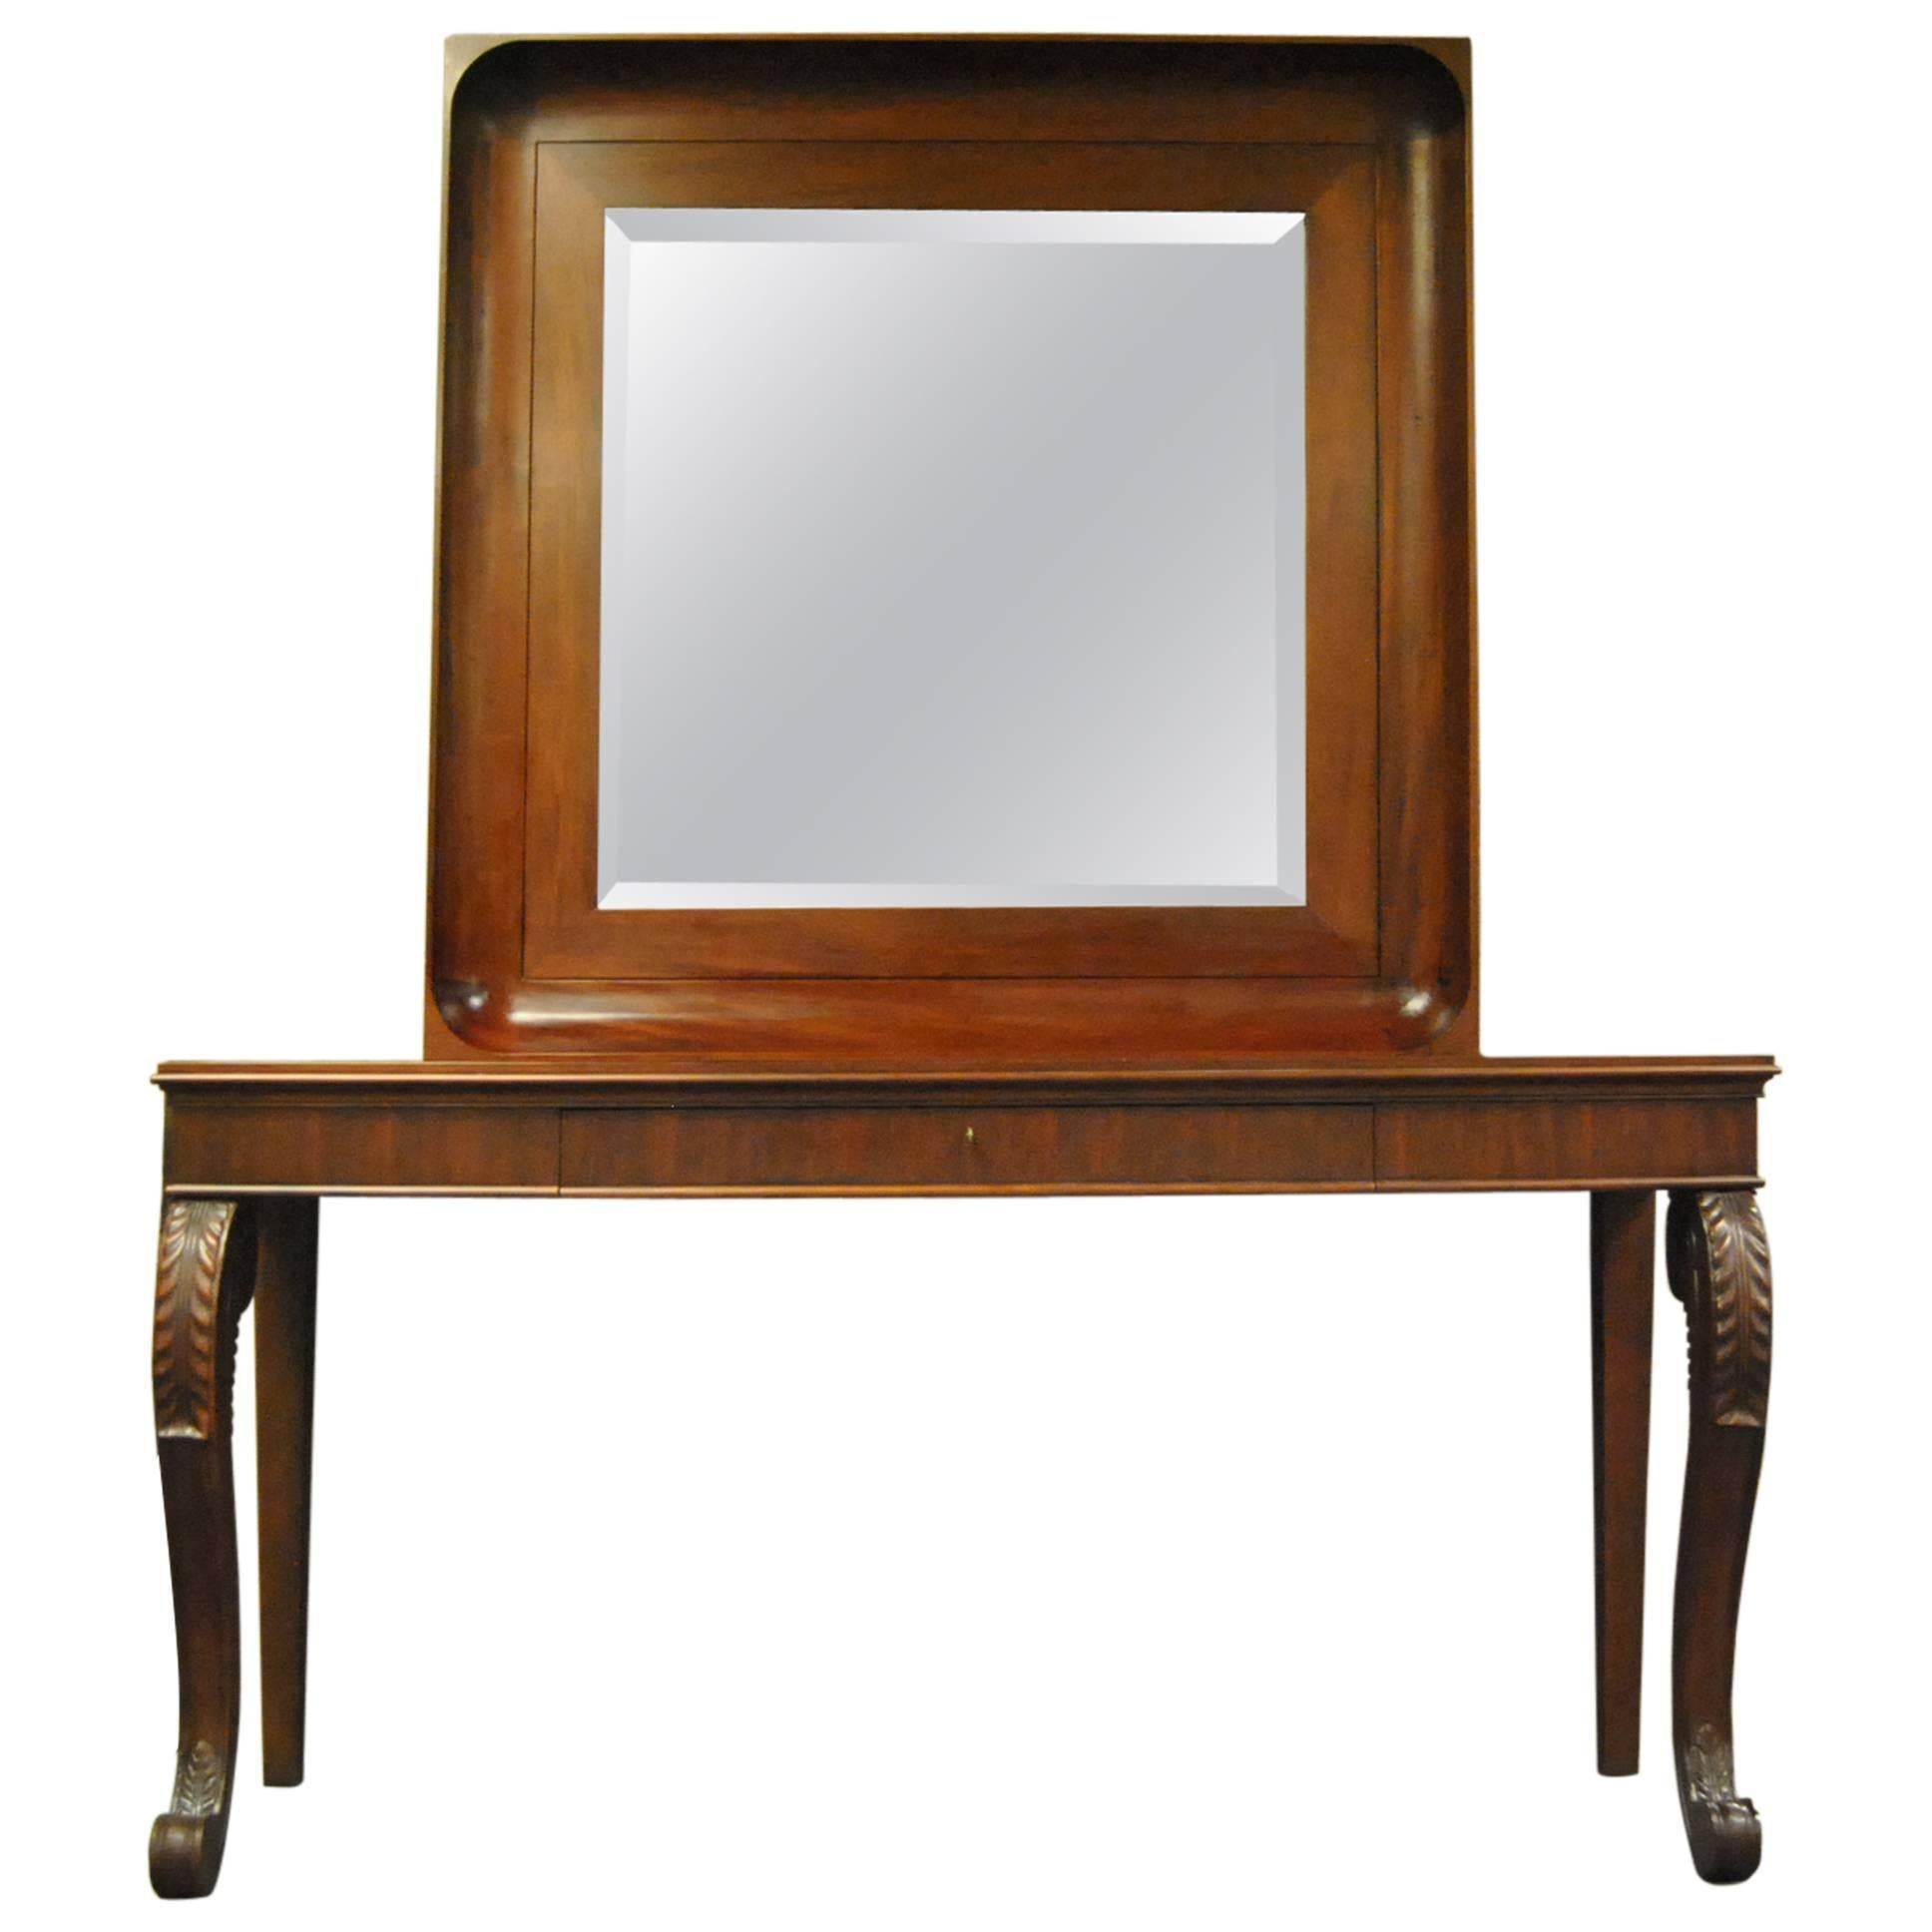 20th Century Console with Large Beveled Mirror by Polo Ralph Lauren